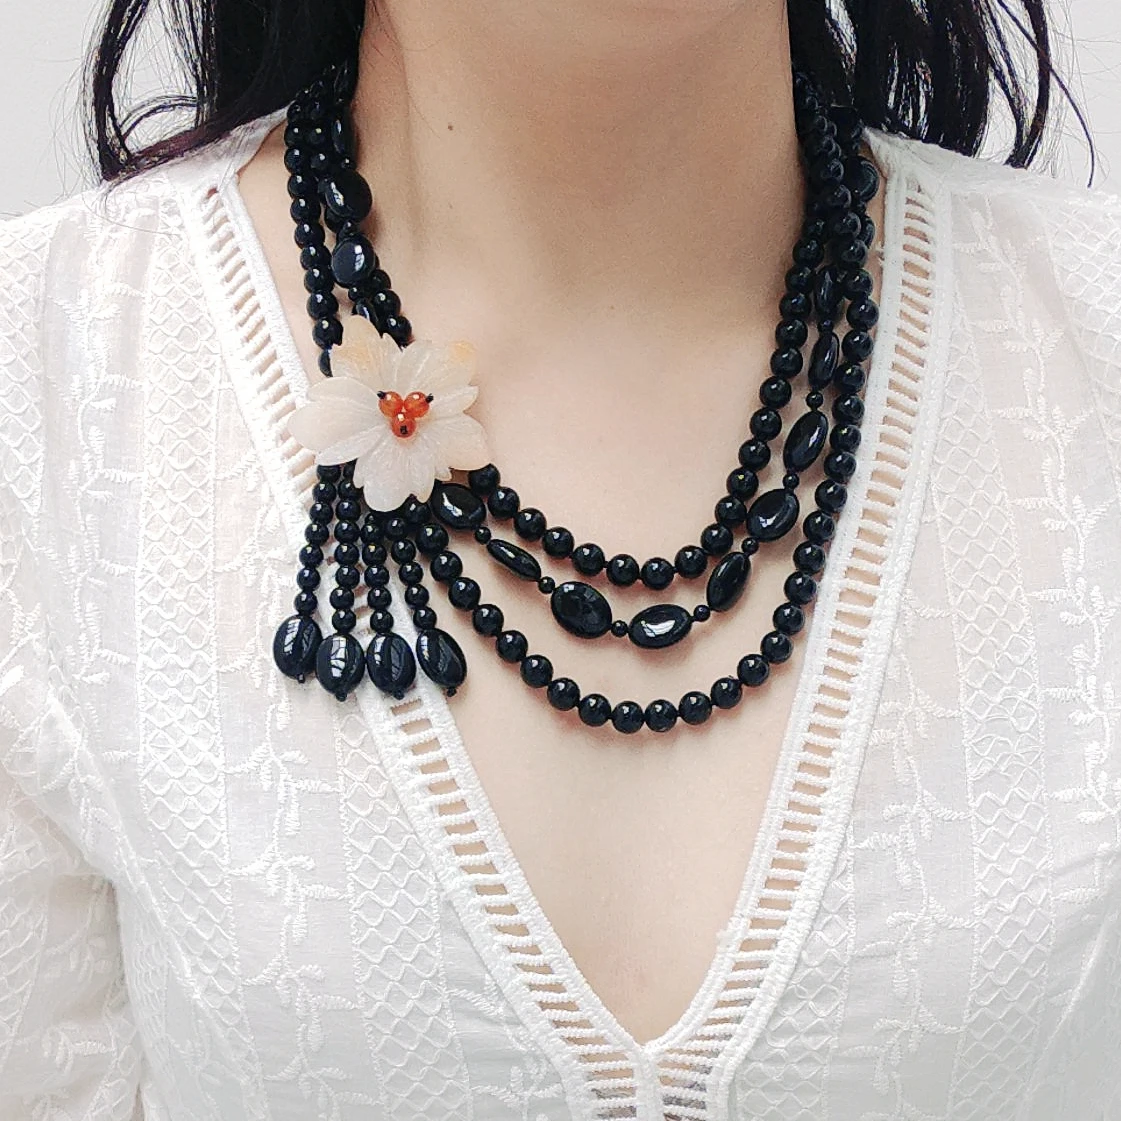 

Lii Ji Real Stone Black Color Statement Necklace 52cm Black Onyx Yellow Jade Flowers Tassels Necklace Women Party Jewelry